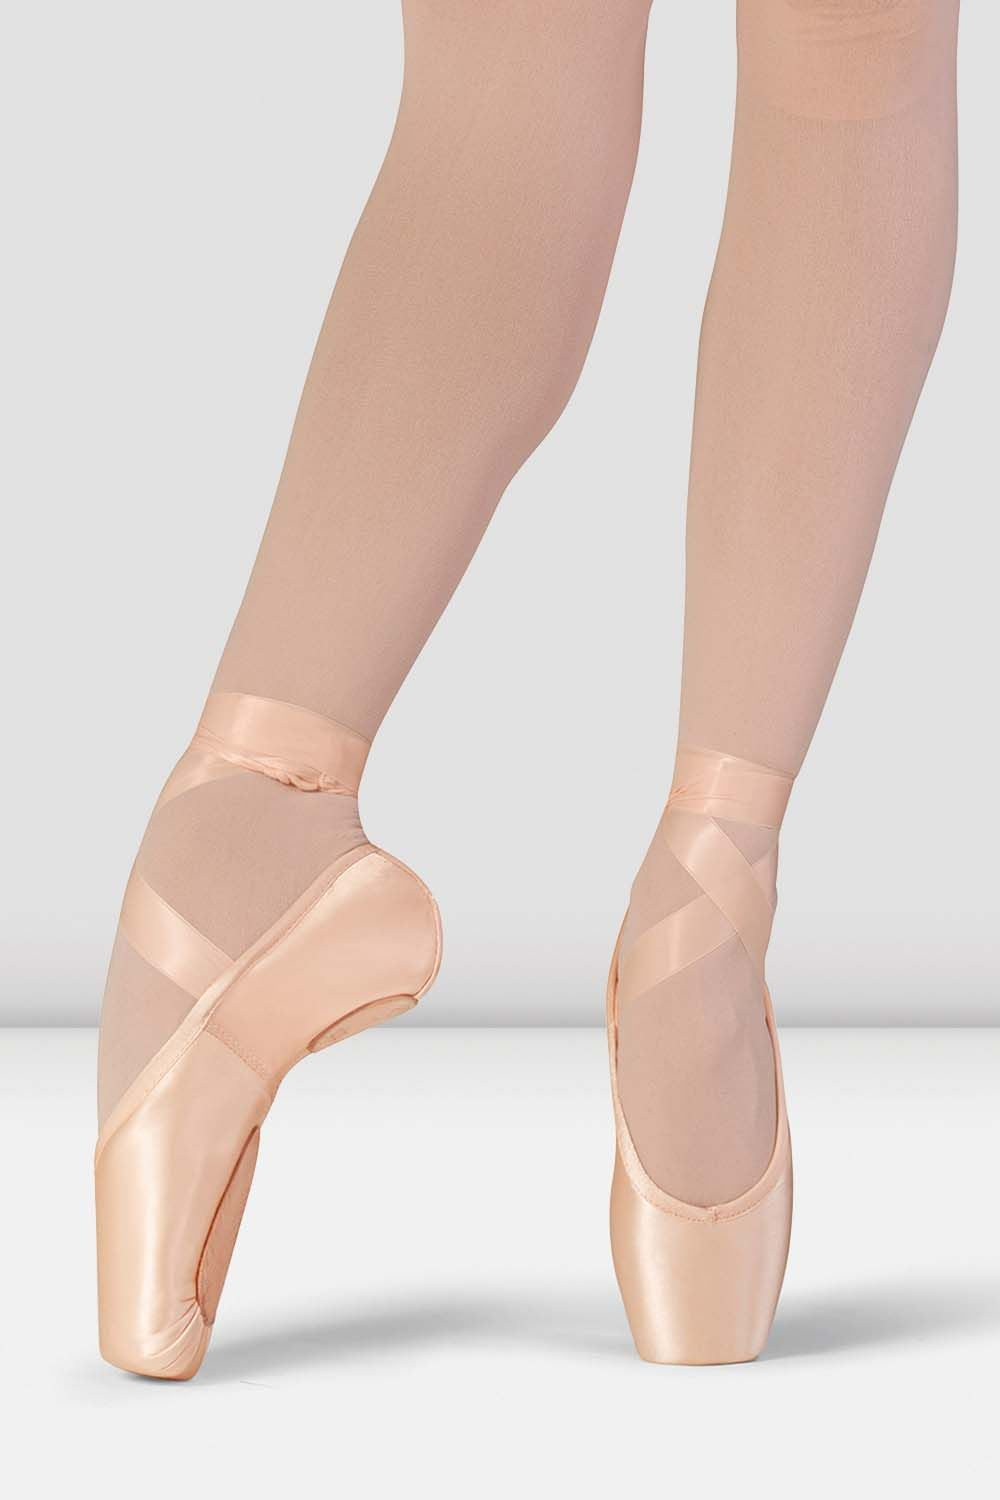 Pointe Shoes 3.0 - Ballet Pink's Code & Price - RblxTrade